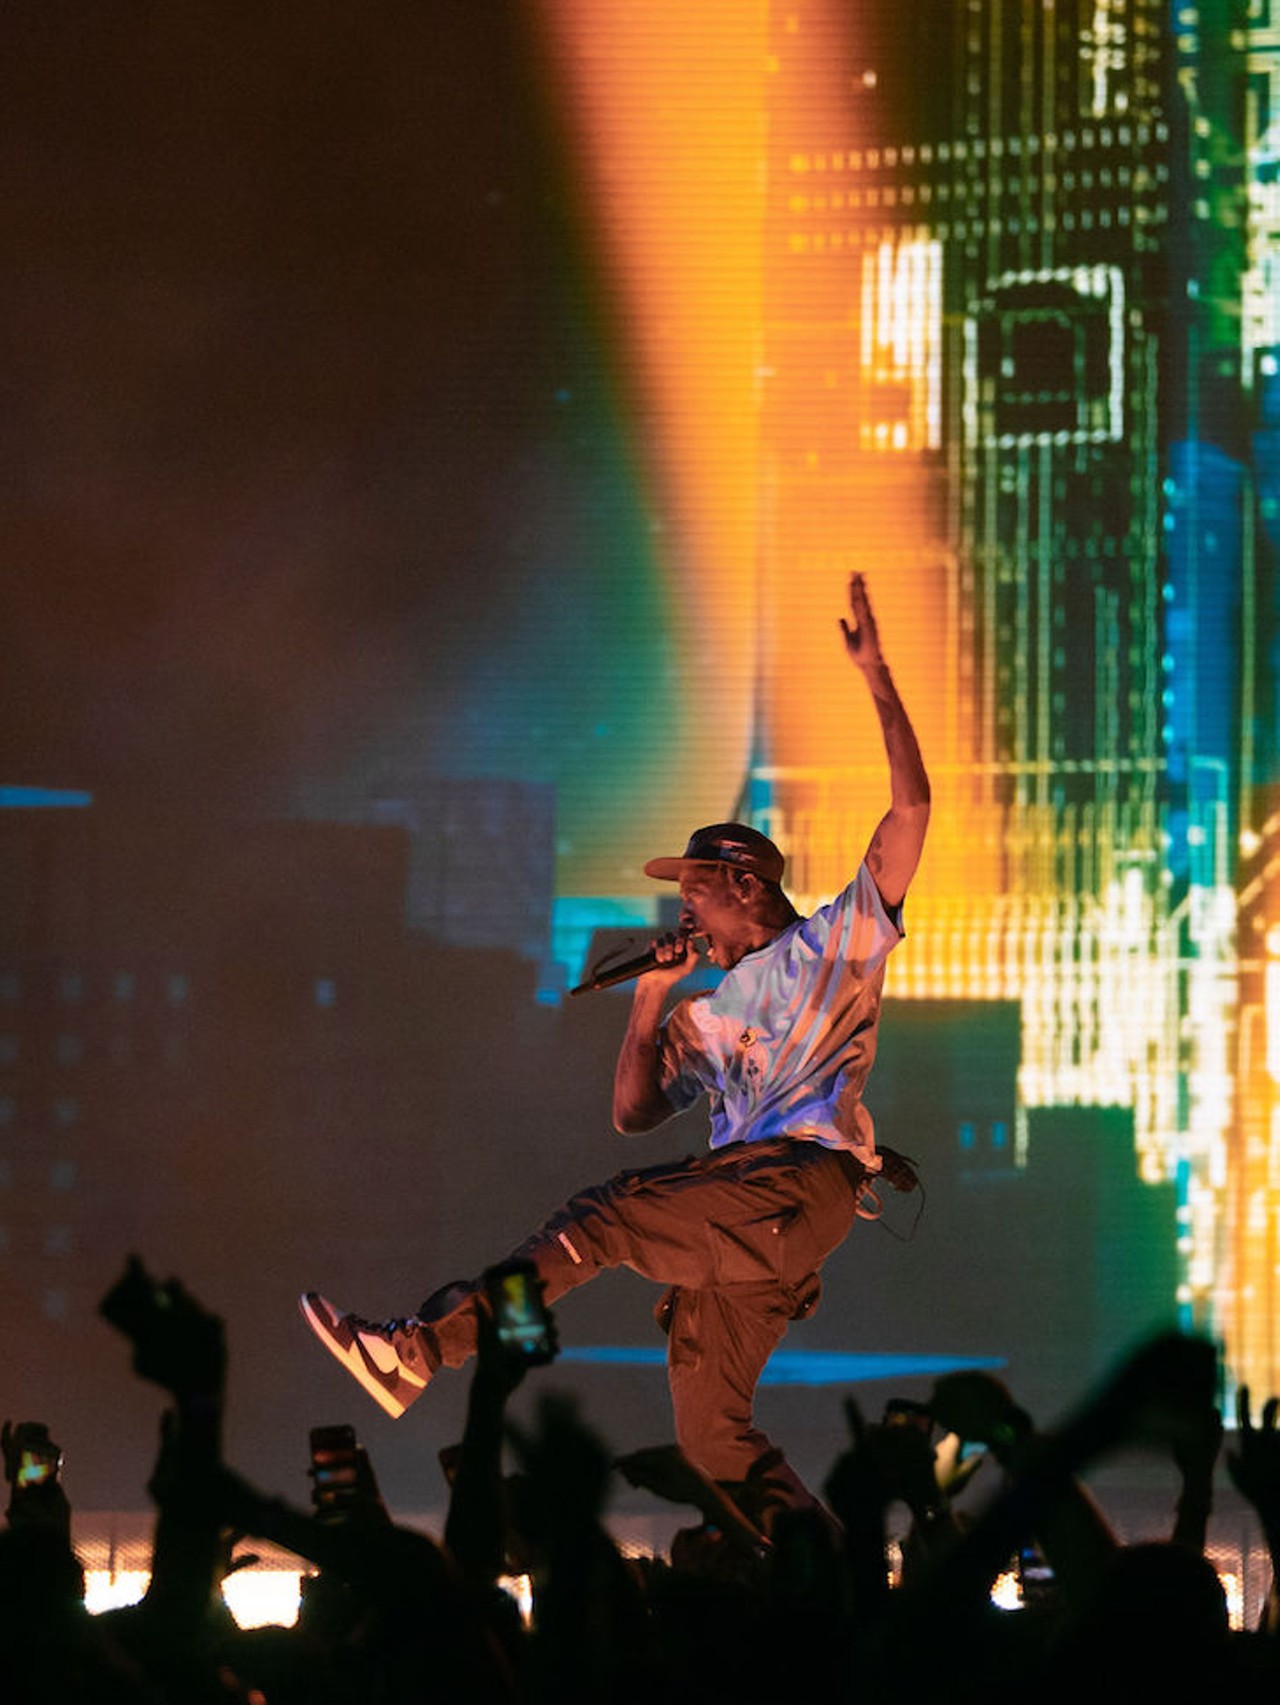 Photos from Travis Scott's Orlando concert at the Amway Center